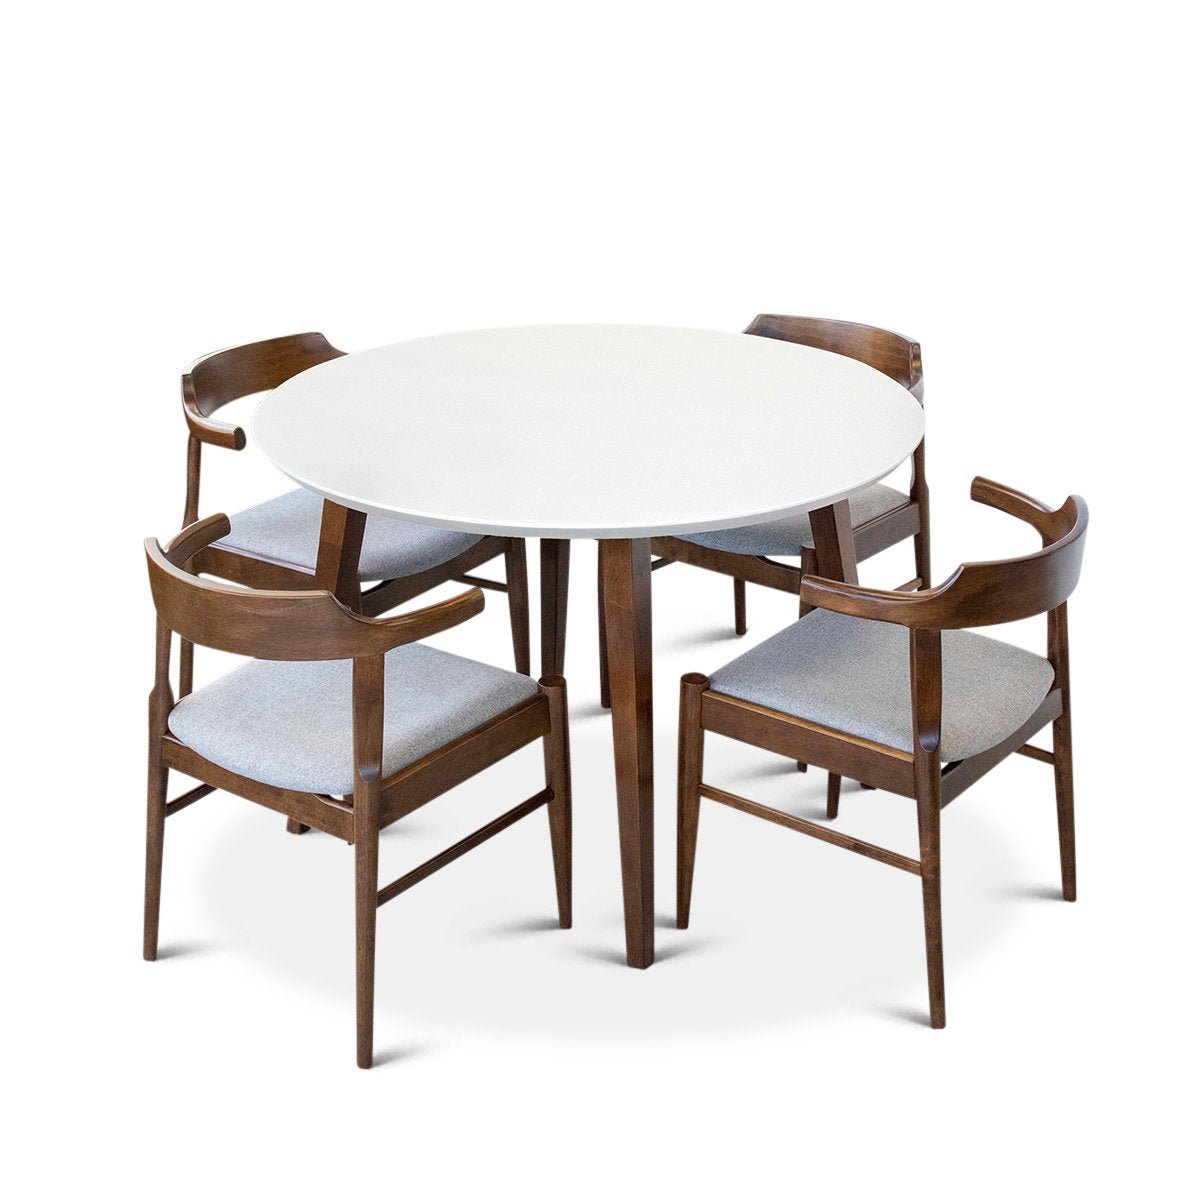 Palmer Dining set - 4 Sterling Gray Dining Chairs | MidinMod | TX | Best Furniture stores in Houston